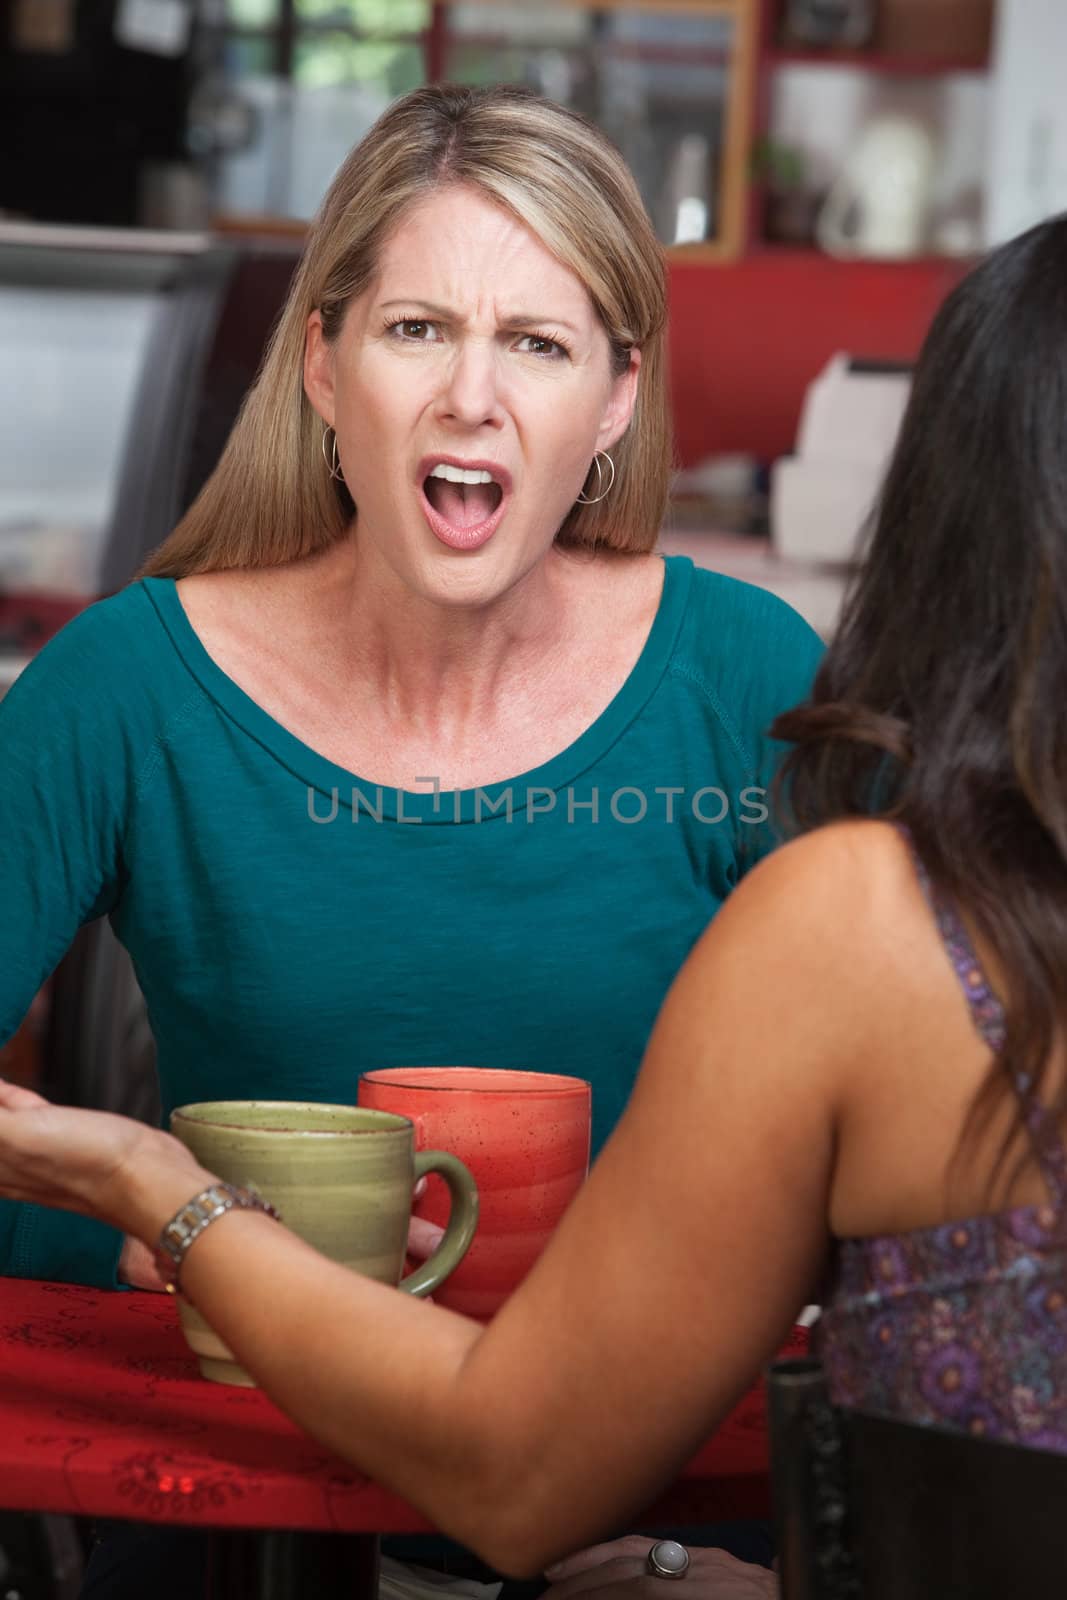 Outraged European woman across from person in a coffeehouse